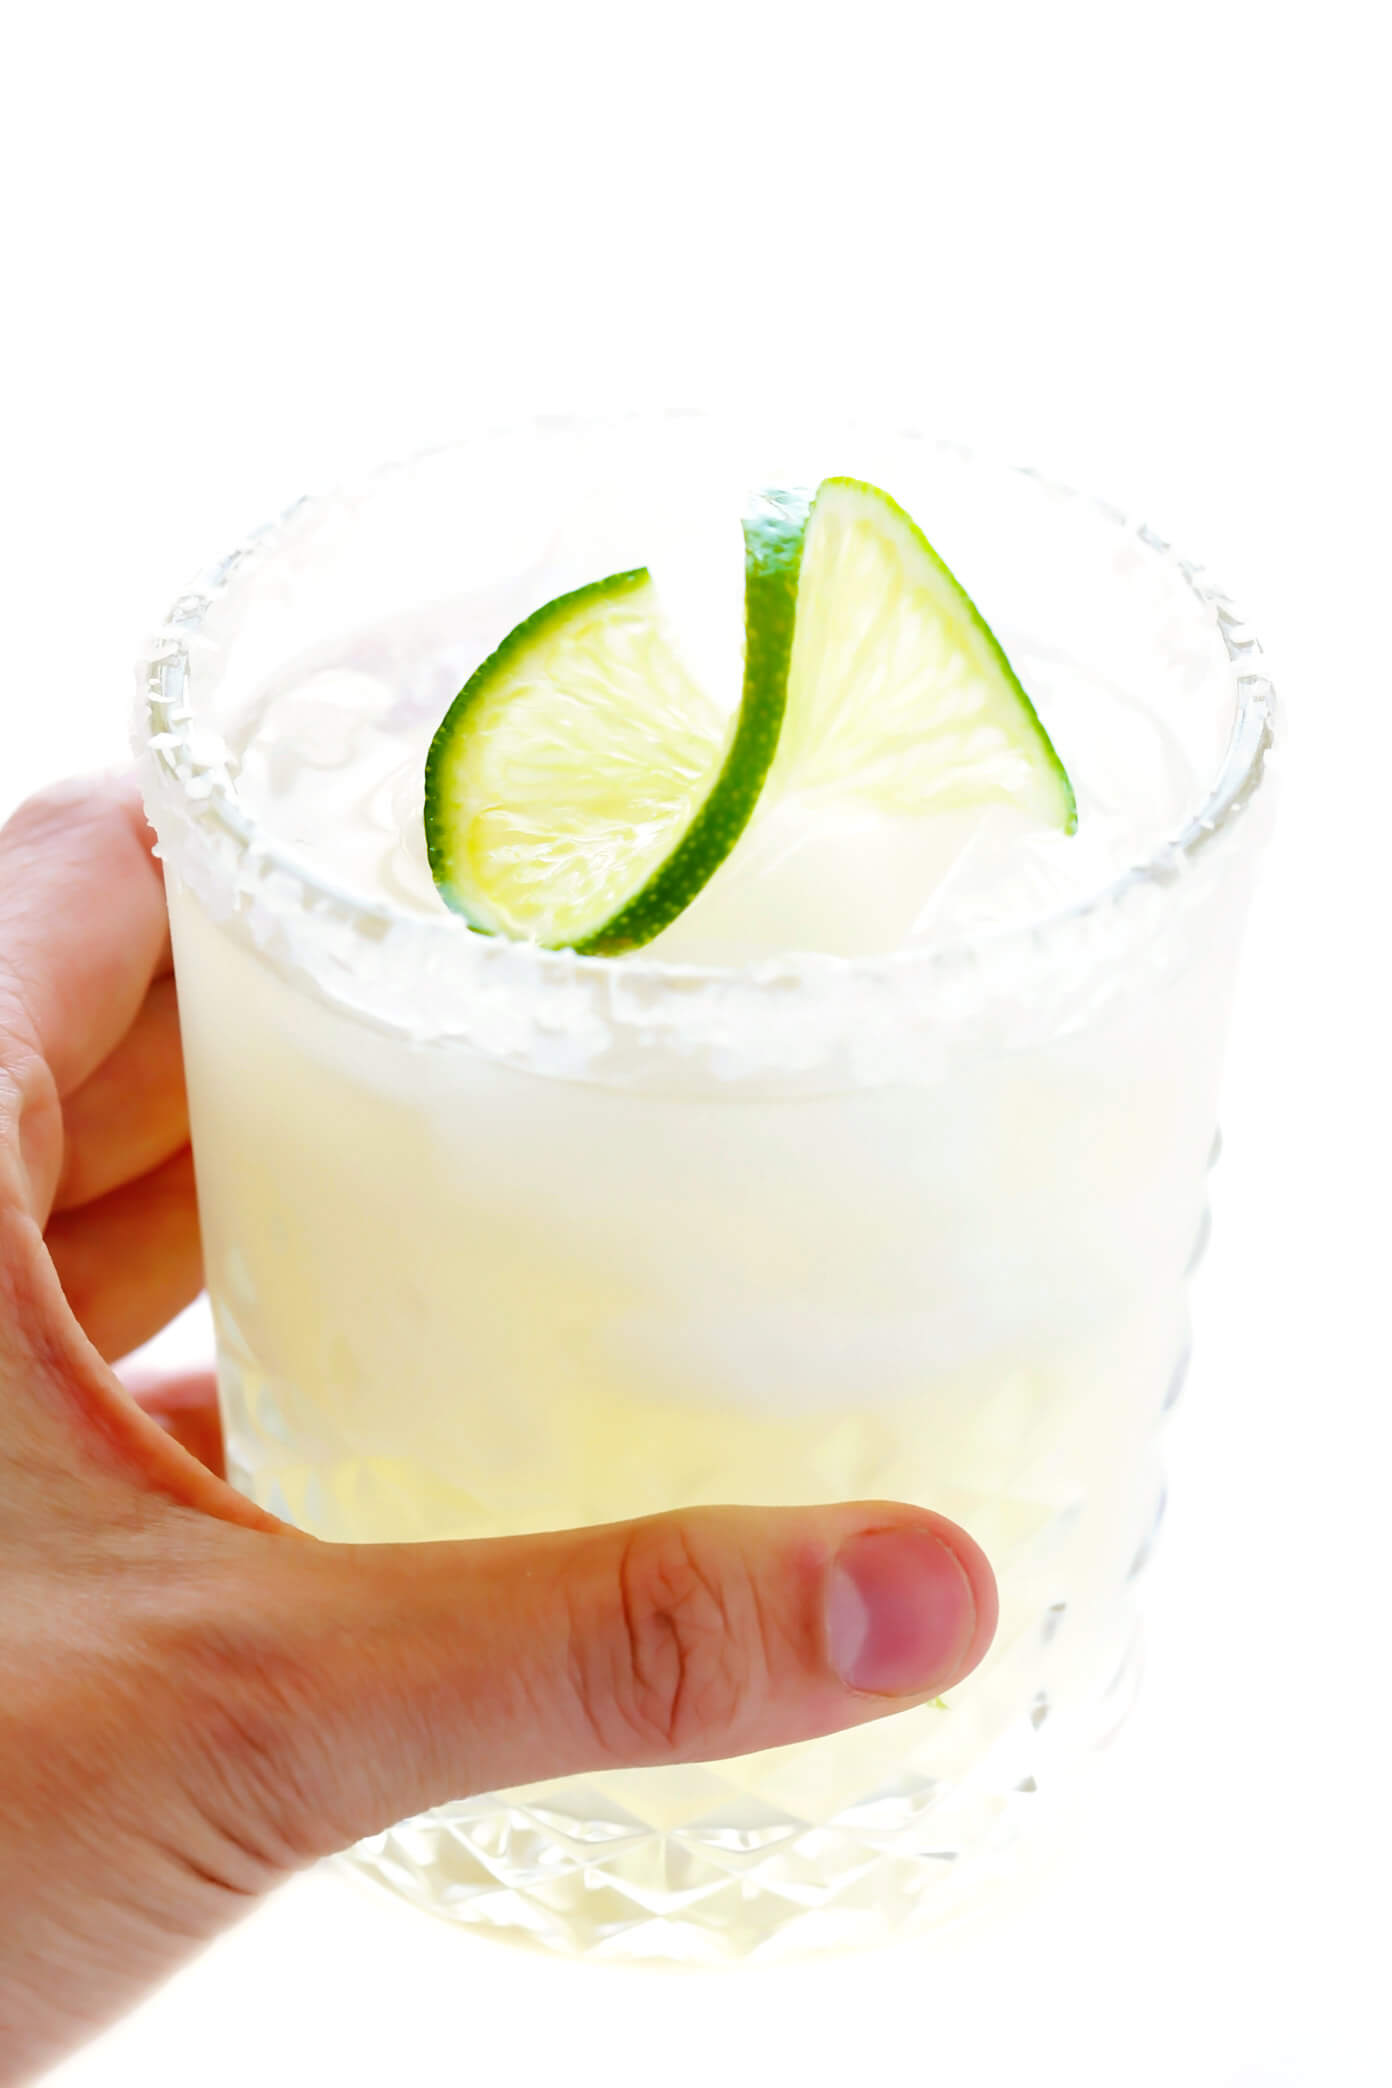 What Is In A Margarita Drink? 